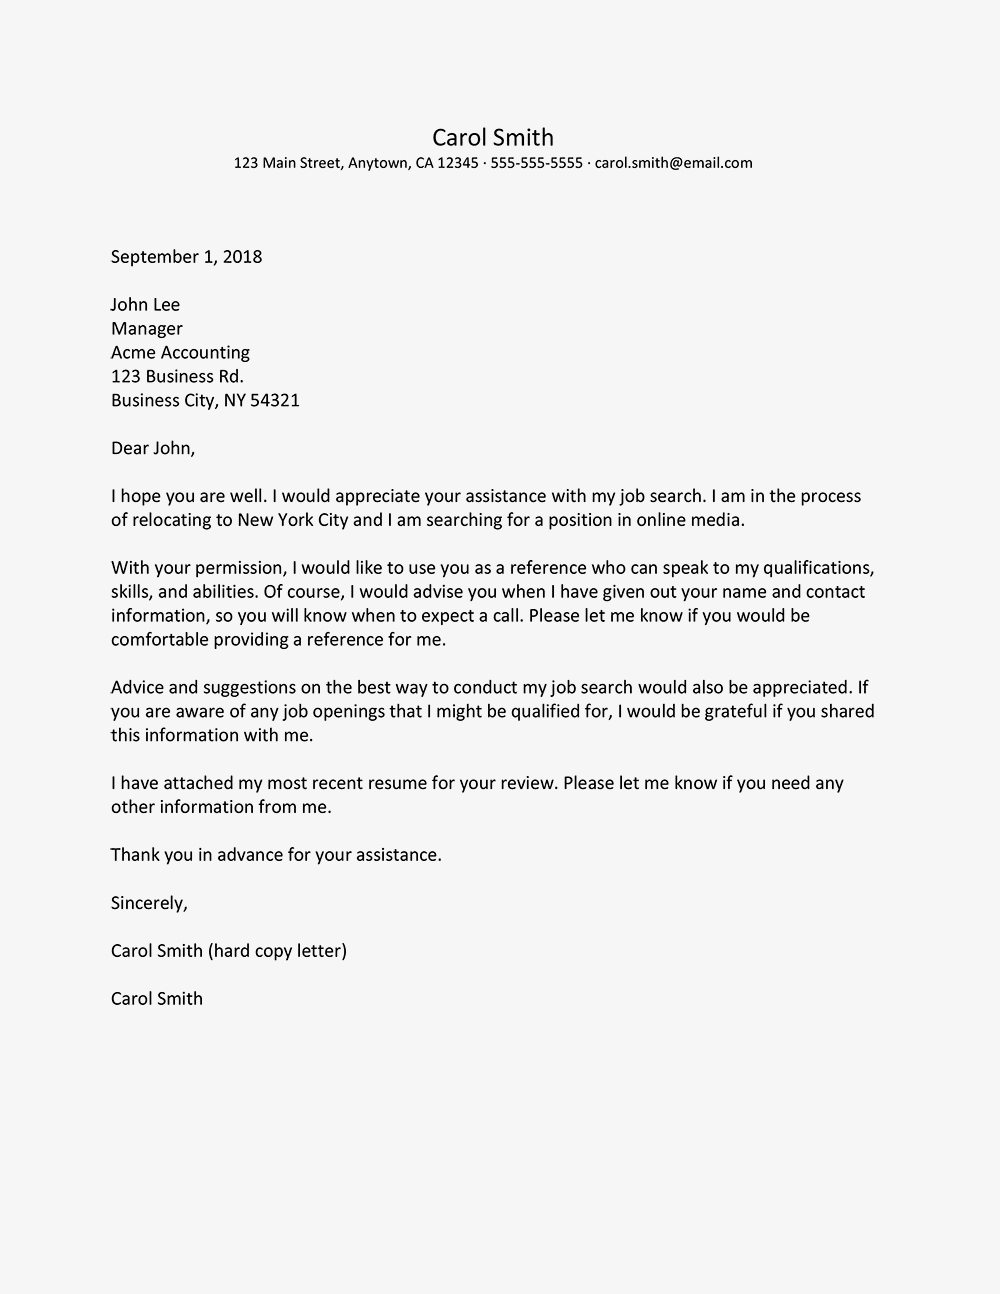 Email Request For Letter Of Recommendation From Professor within measurements 1000 X 1294